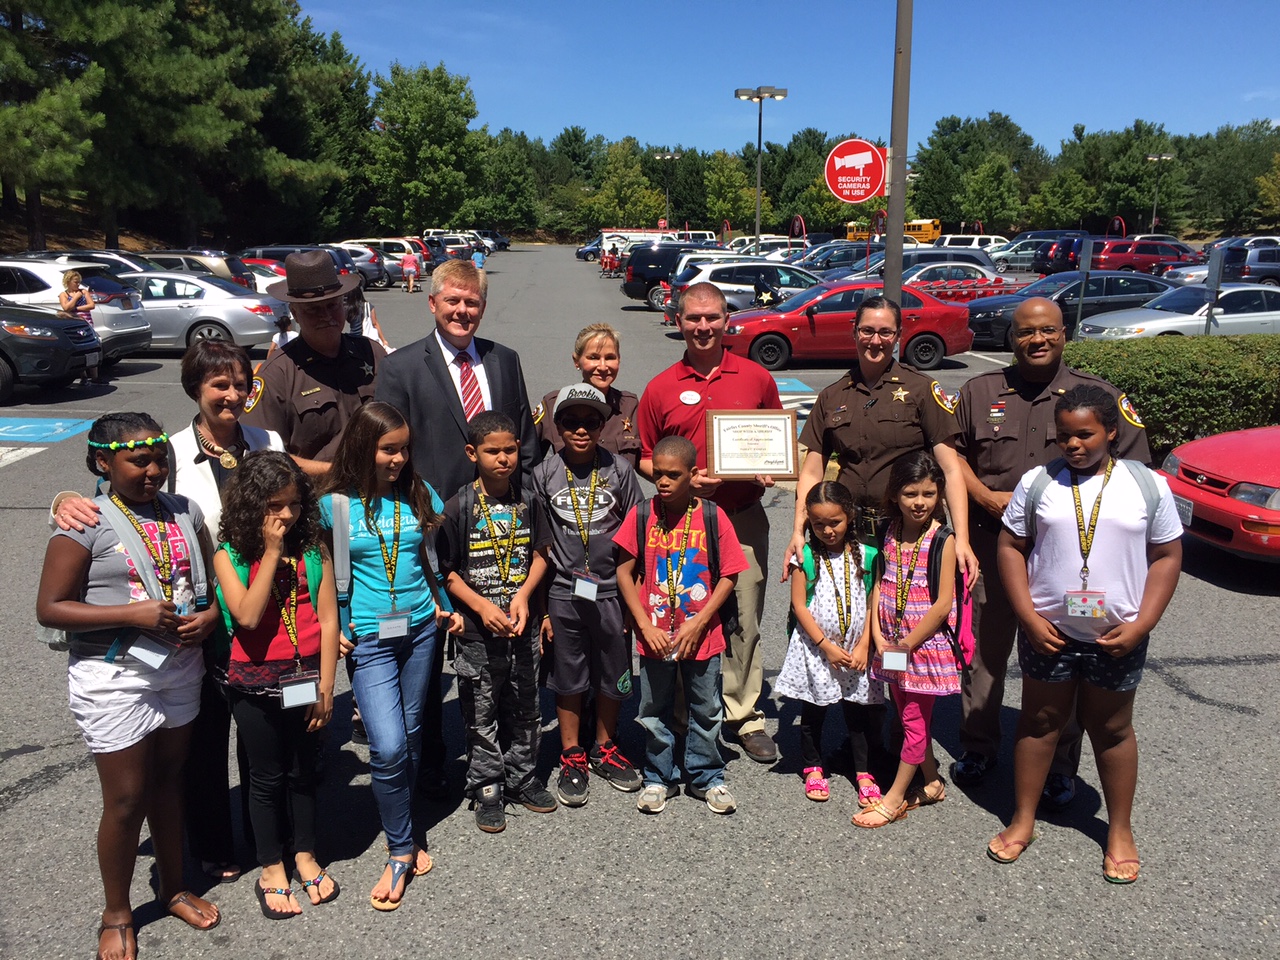 Just some of the 40 homeless children being treated to a shopping spree pose with Sheriff's deputies and community leaders, including Fairfax County Supervisors Chair Sharon Bulova, Supervisor John Cook, Sheriff Stacey A. Kincaide and Nathan Cooke of Target. (WTOP/Kristi King)